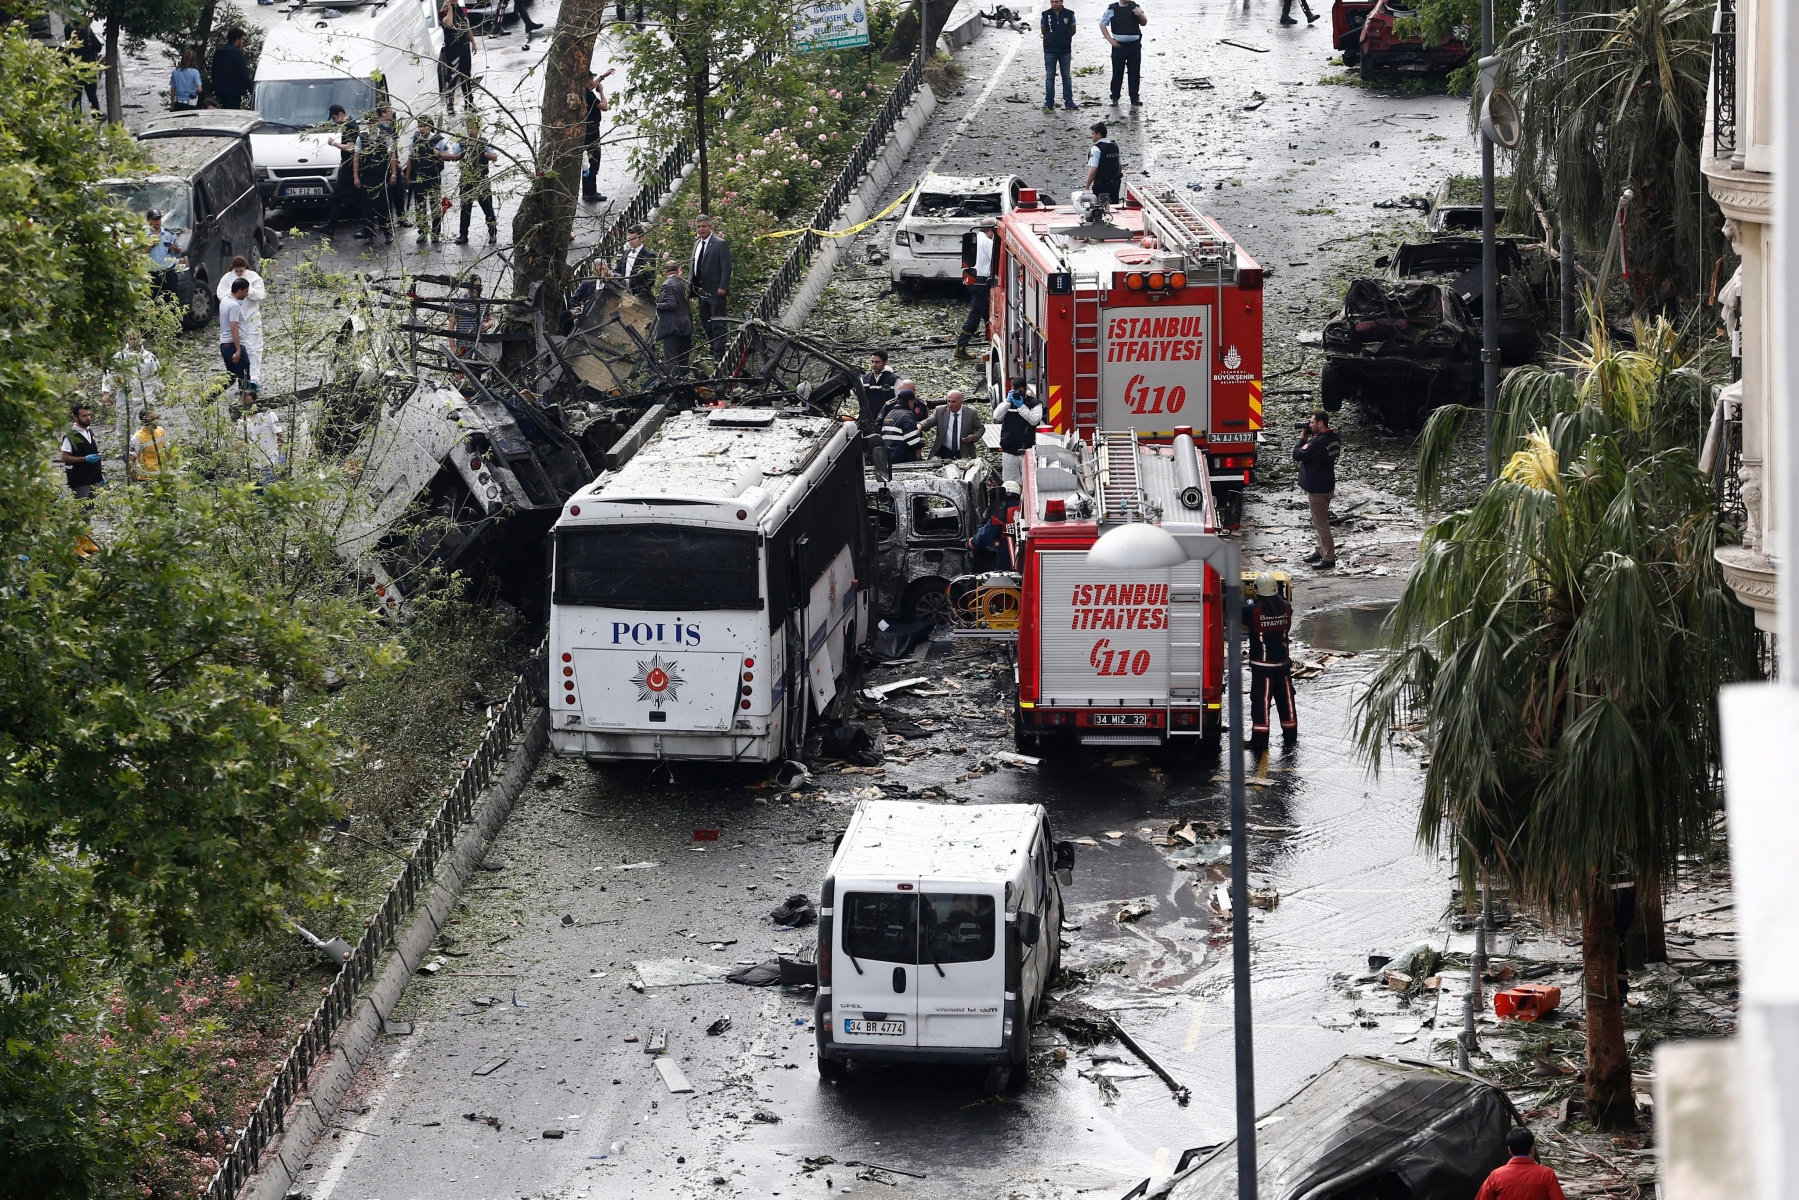 epa05349372 Police officers inspect the area after a bomb attack to a police bus in the Vezneciler district of Istanbul, Turkey, 07 June 2016. At least five people were wounded after an explosion, caused by a bomb, targeted a police bus, local media reported.  EPA/SEDAT SUNA TURKEY BOMB ATTACK